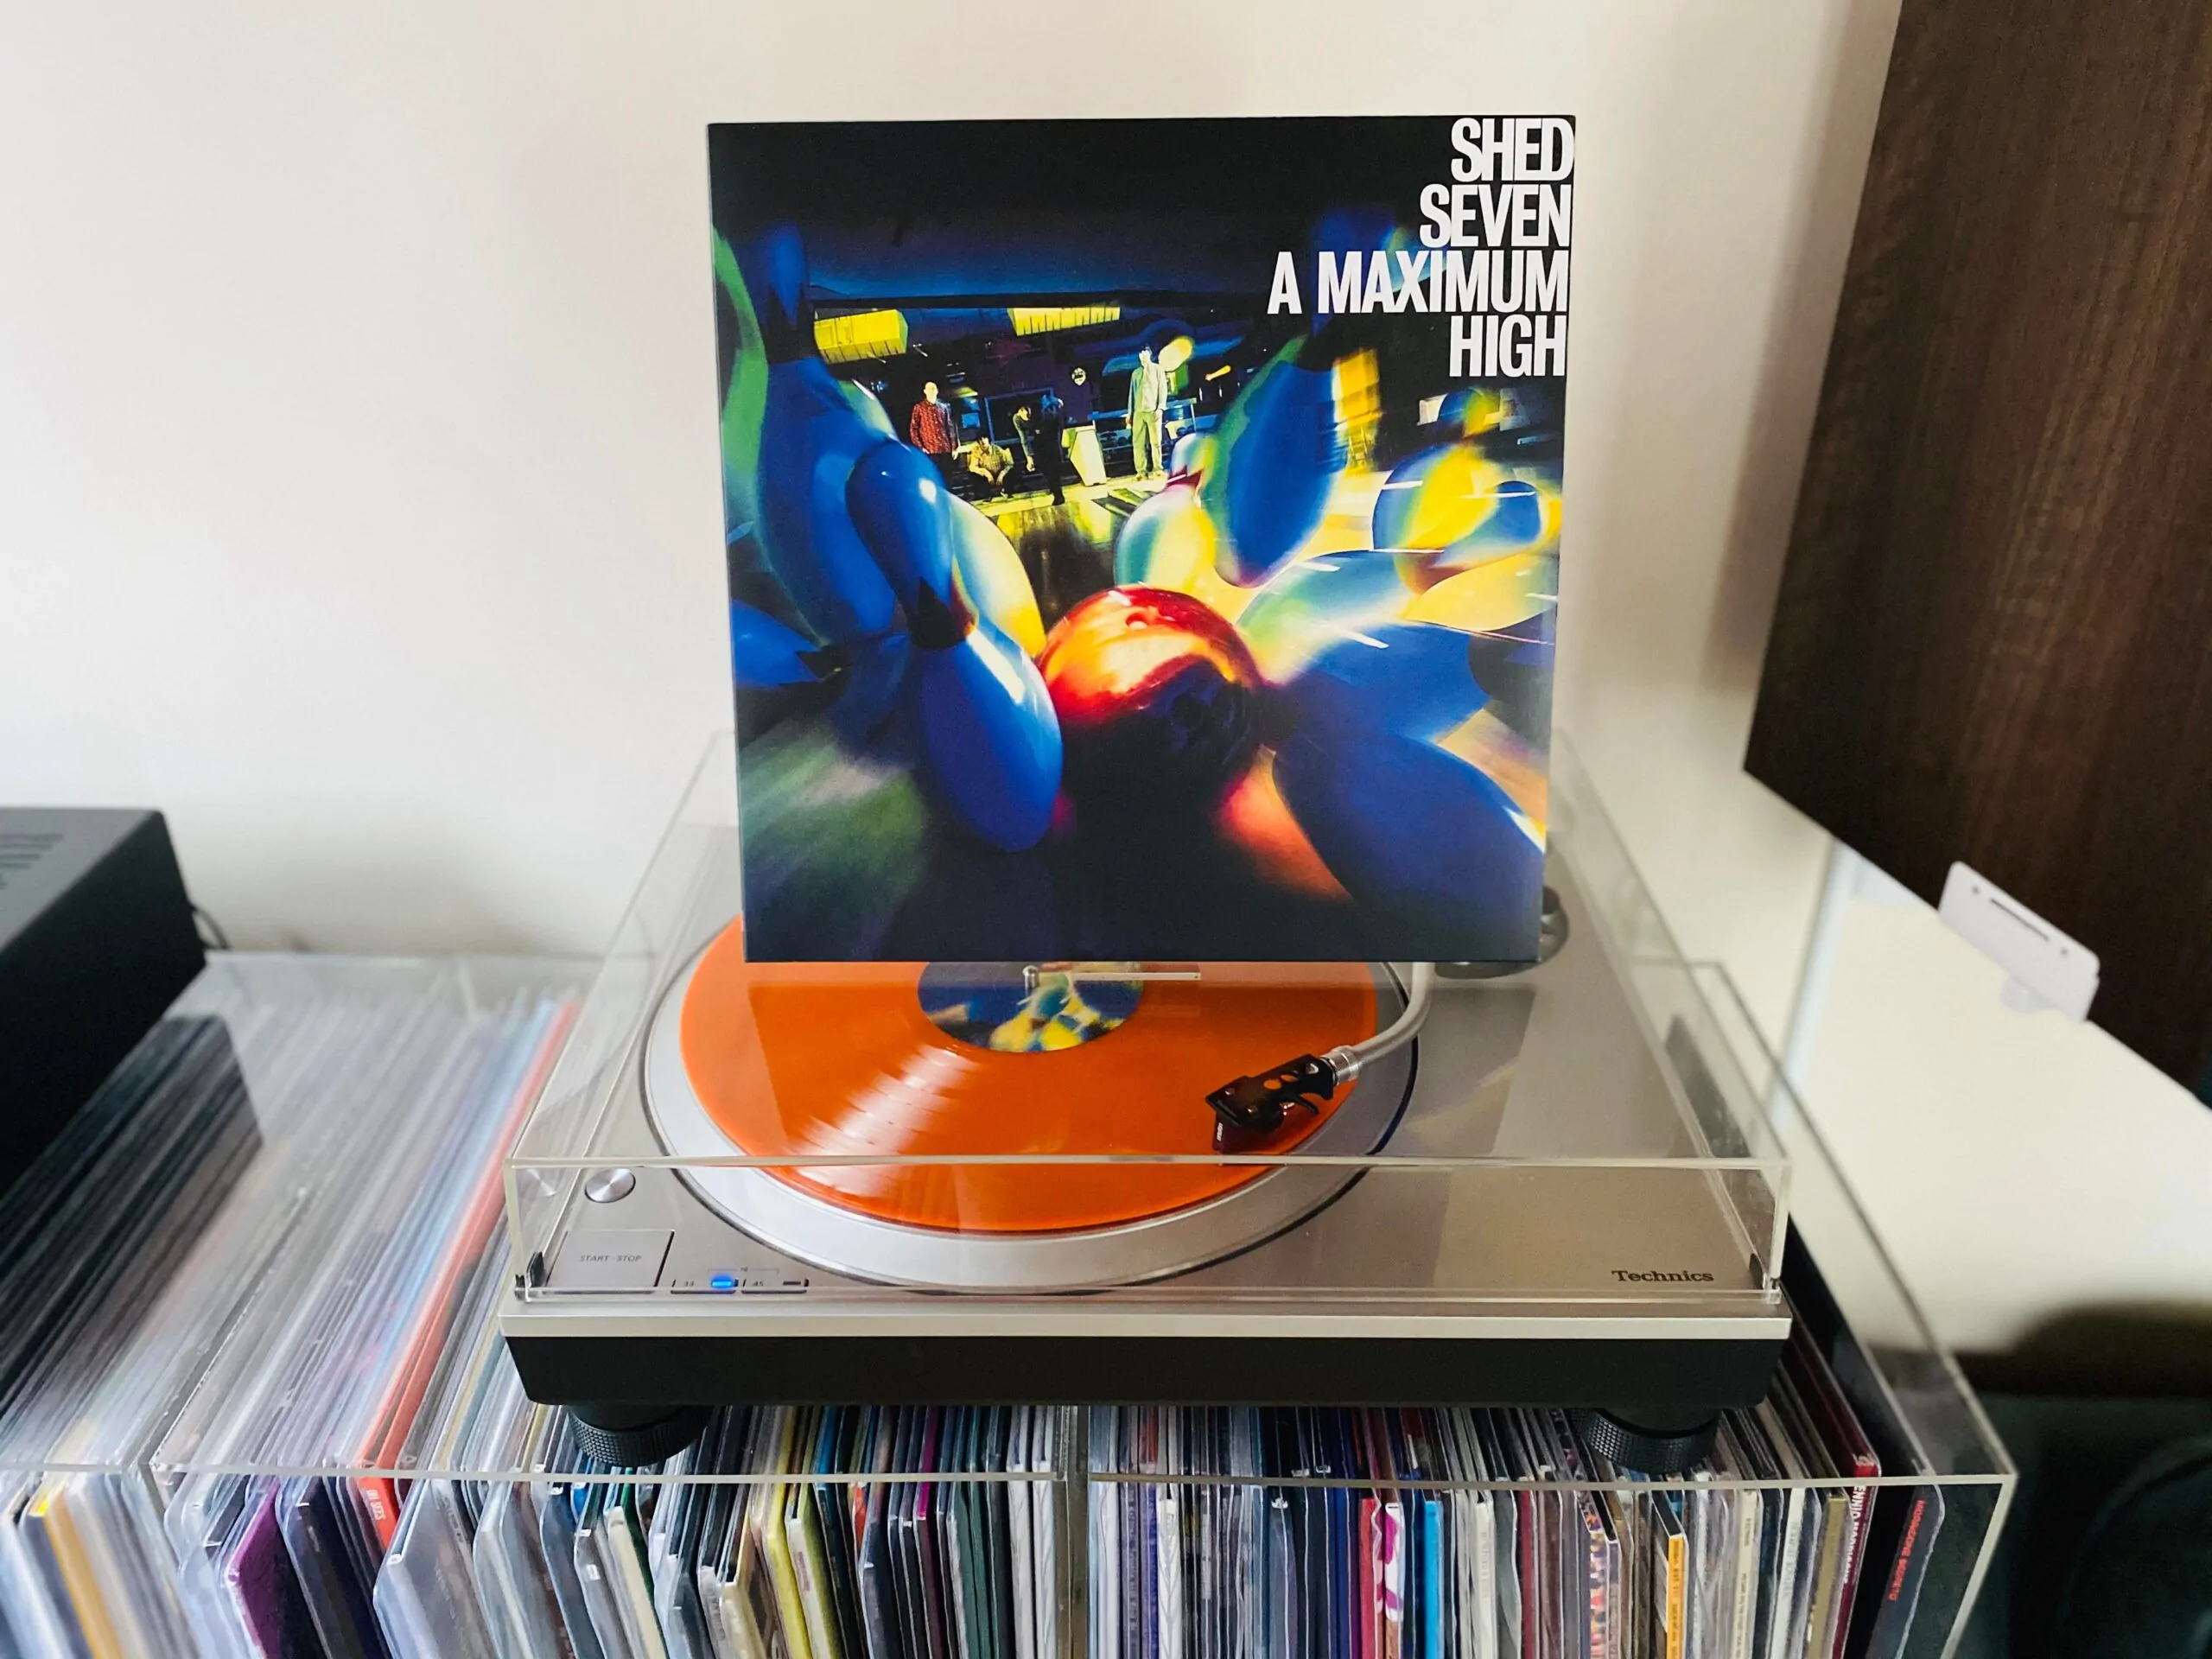 ON THE TURNTABLE: Shed Seven – A Maximum High